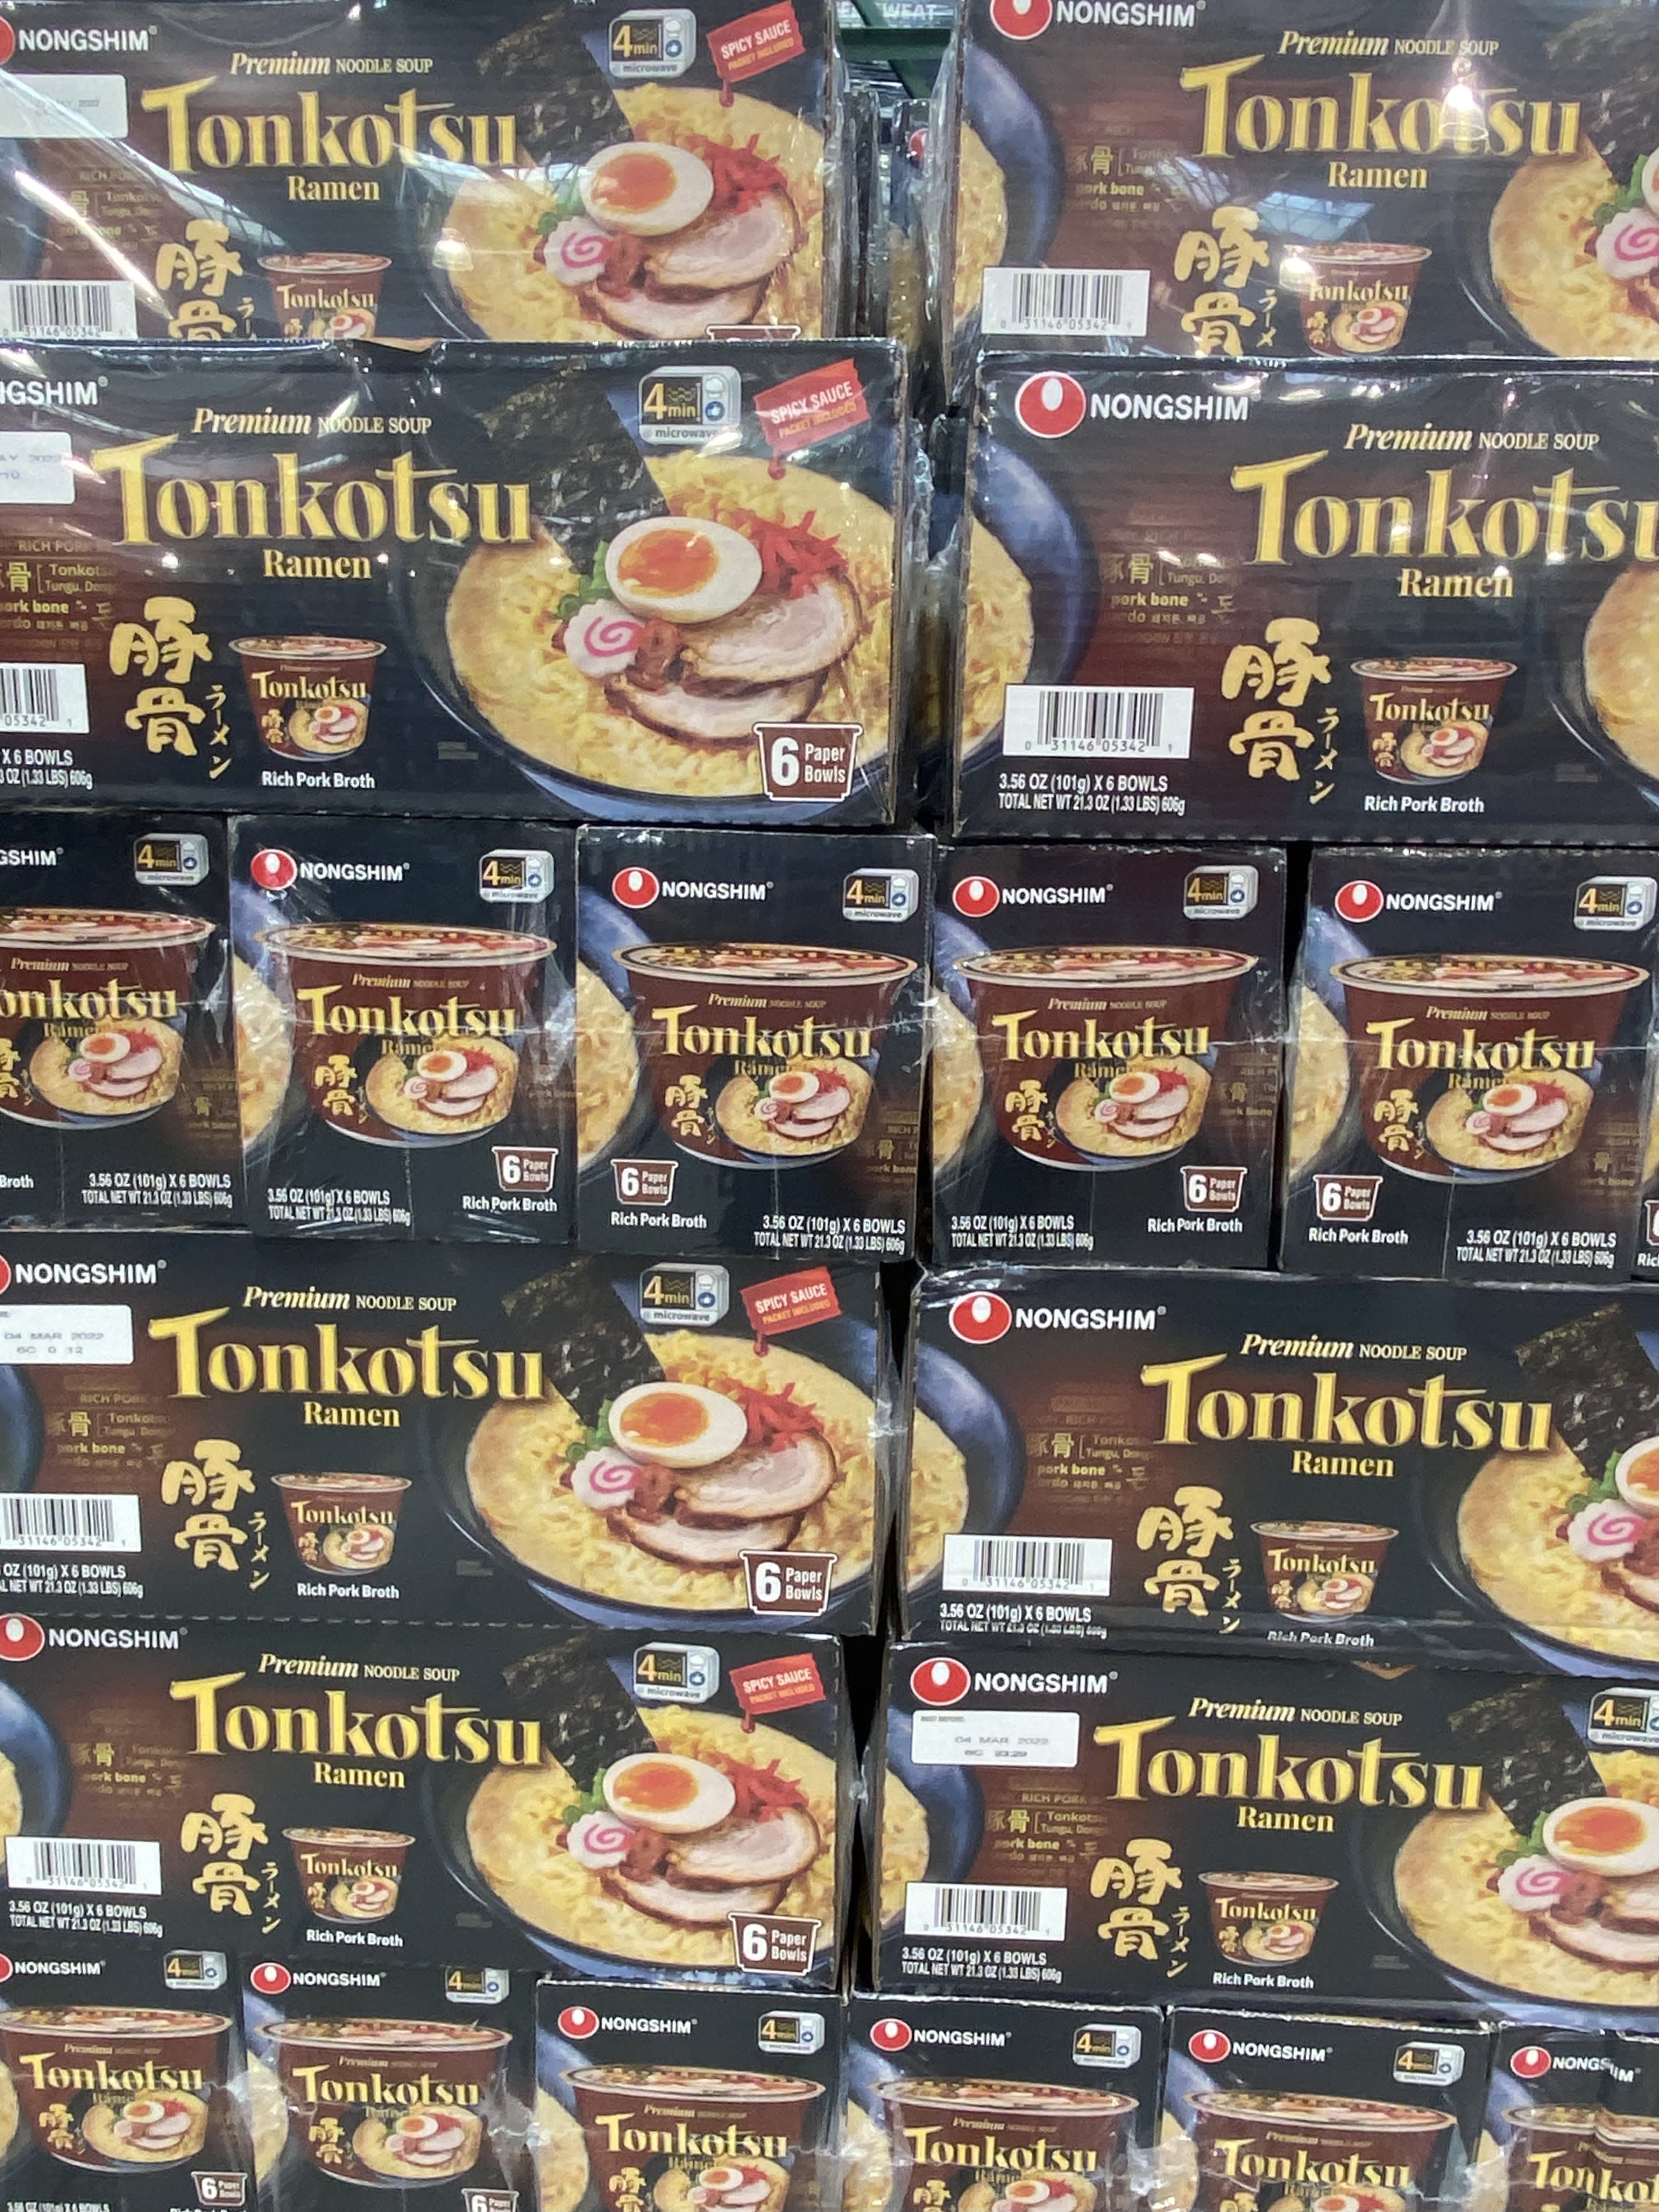 Costco Chimichangas - Worst Frozen Food At Costco?​